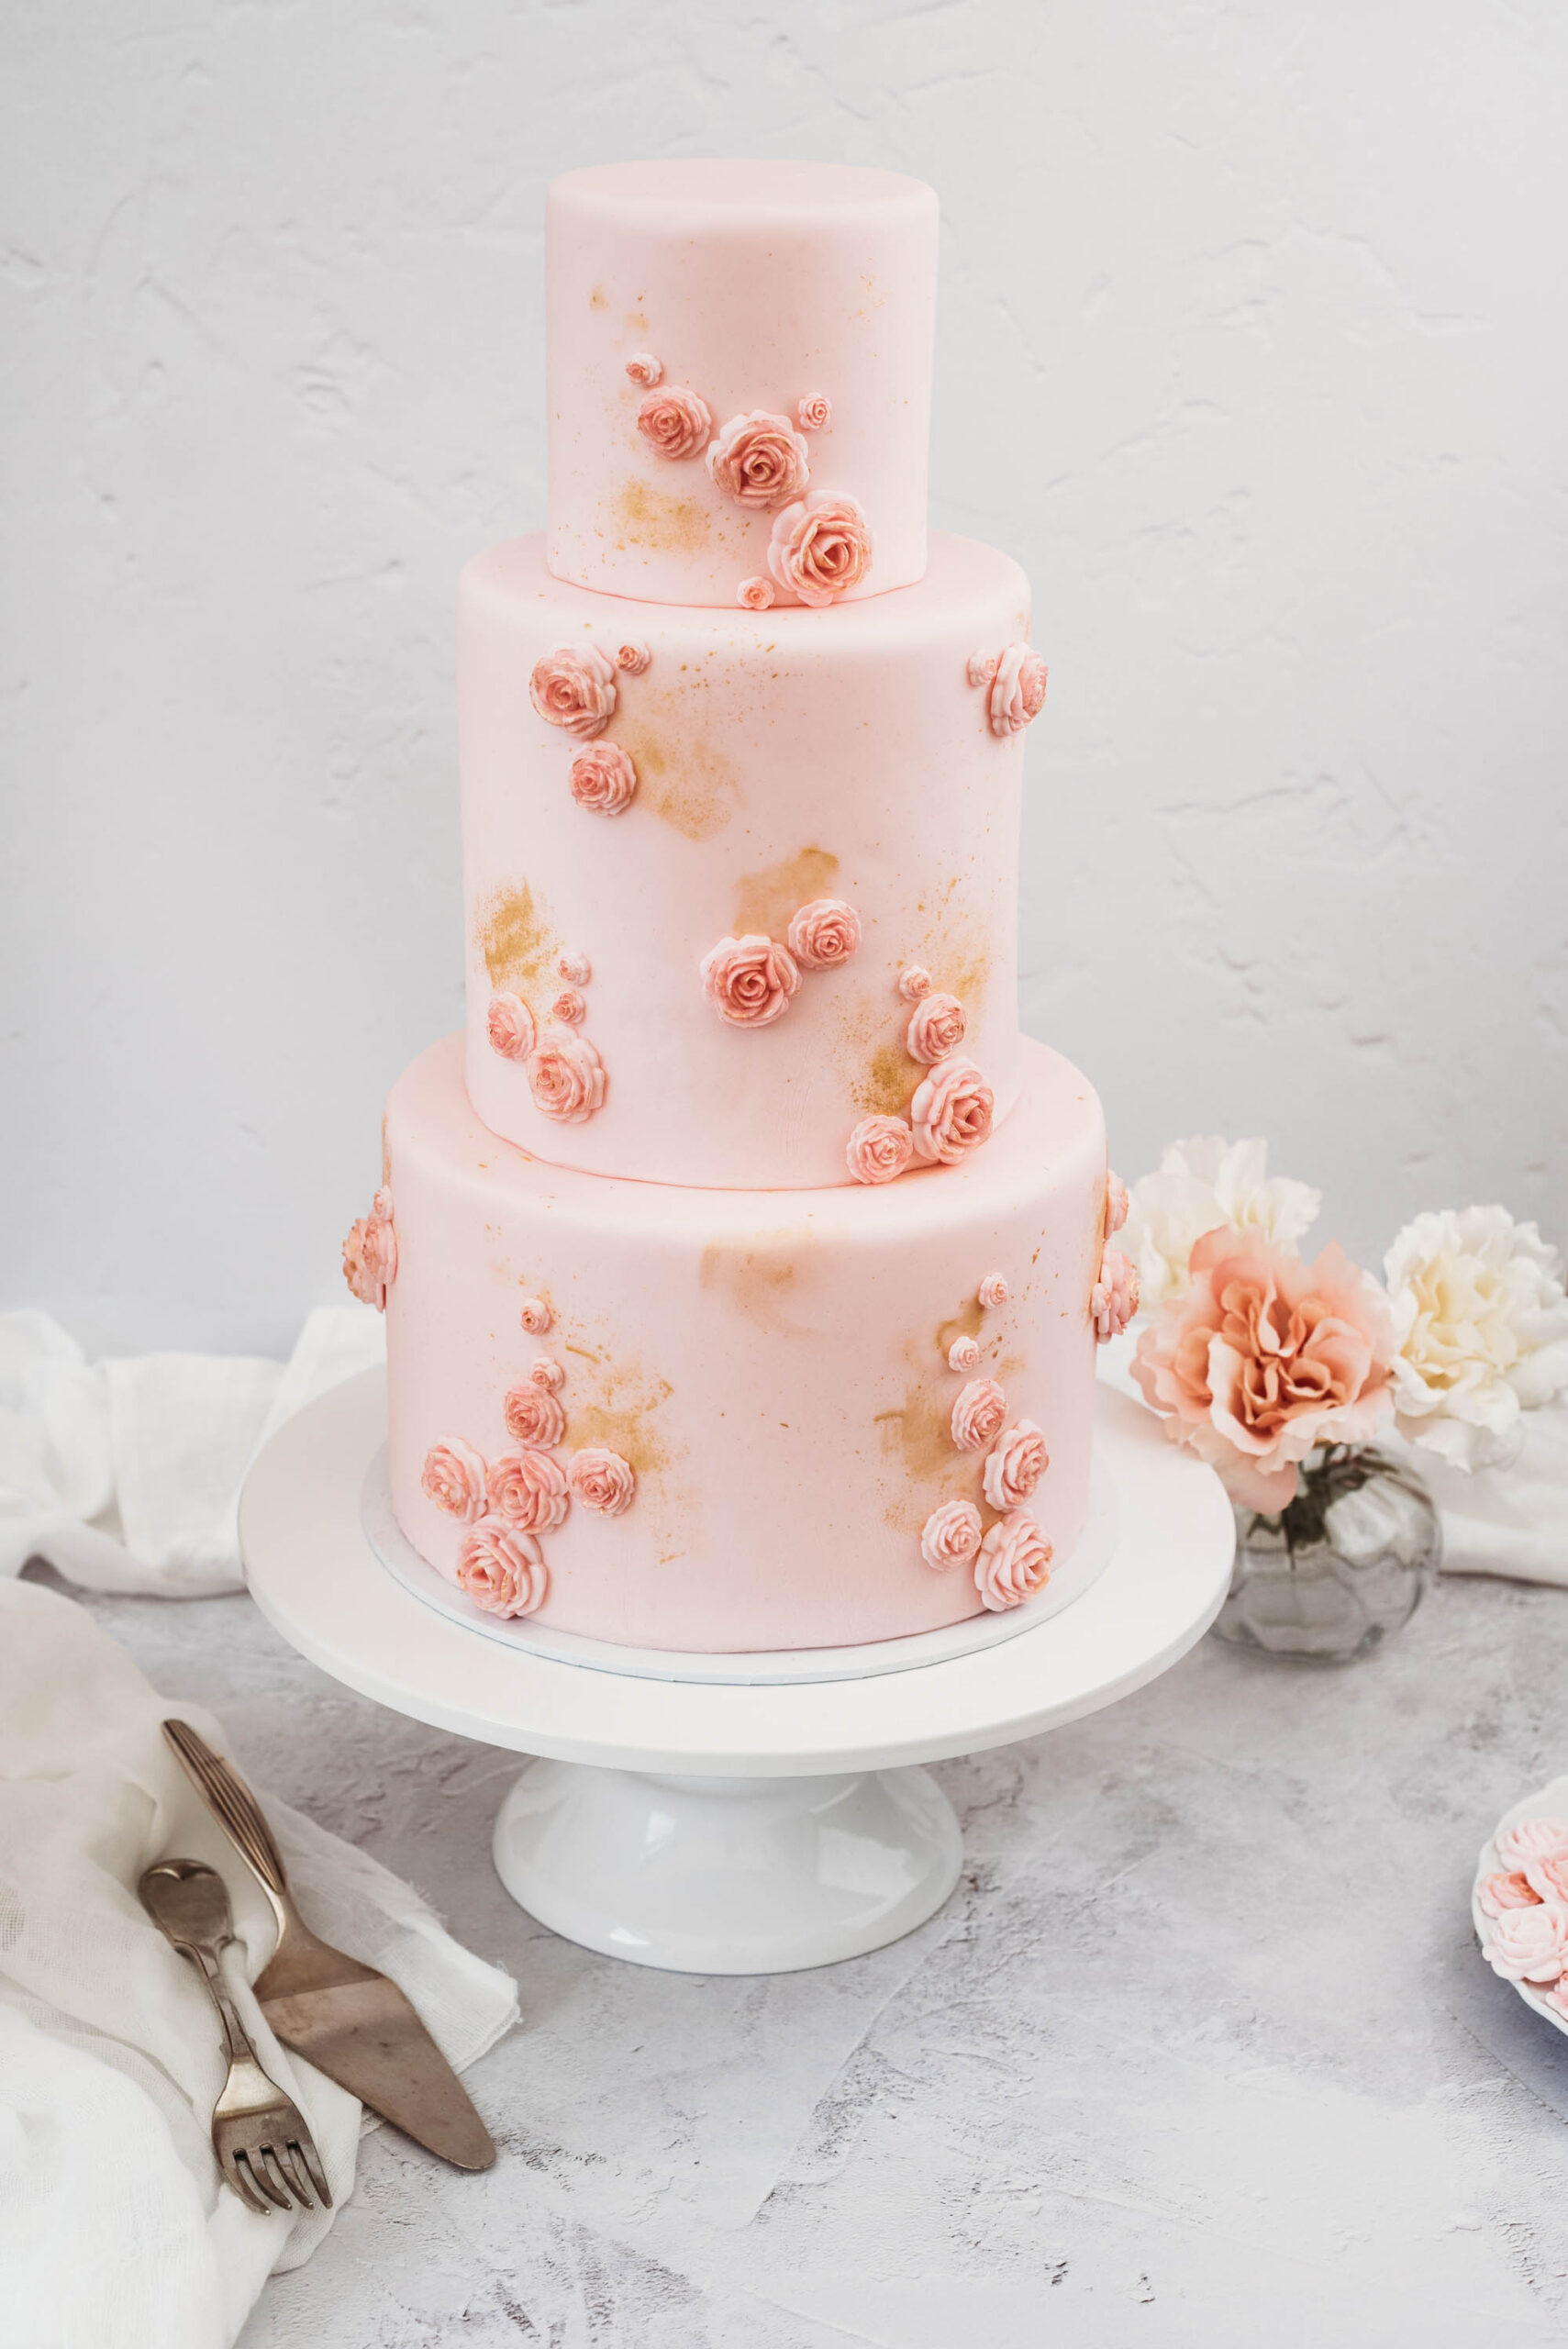 pink three tier wedding cake with delicate pink rose clusters and dashes of pretty gold to give a watercolour effect